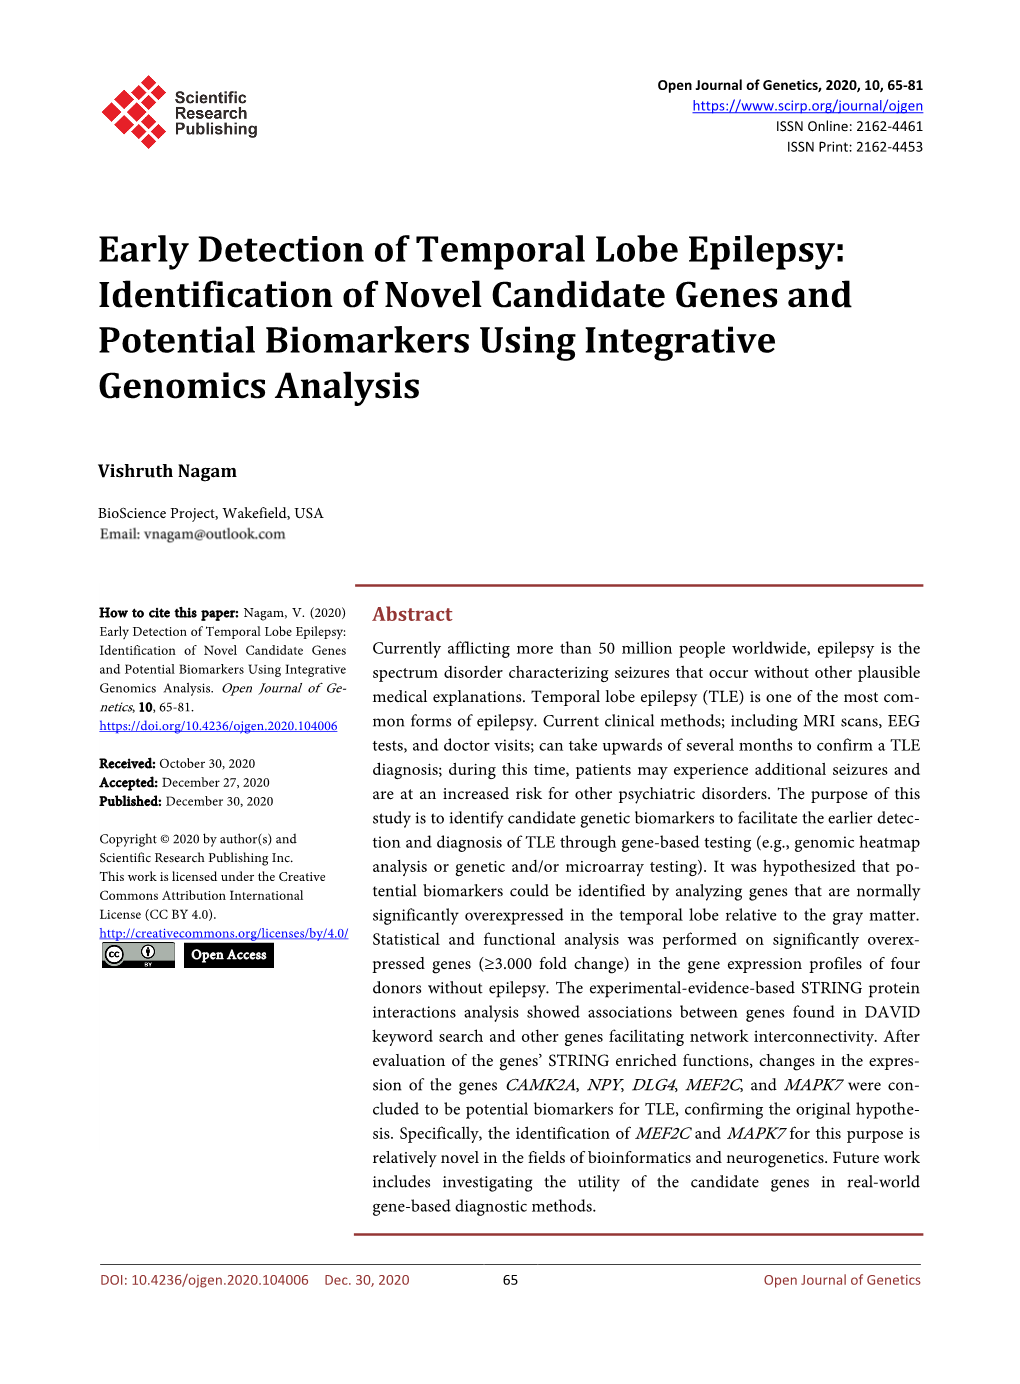 Early Detection of Temporal Lobe Epilepsy: Identification of Novel Candidate Genes and Potential Biomarkers Using Integrative Genomics Analysis